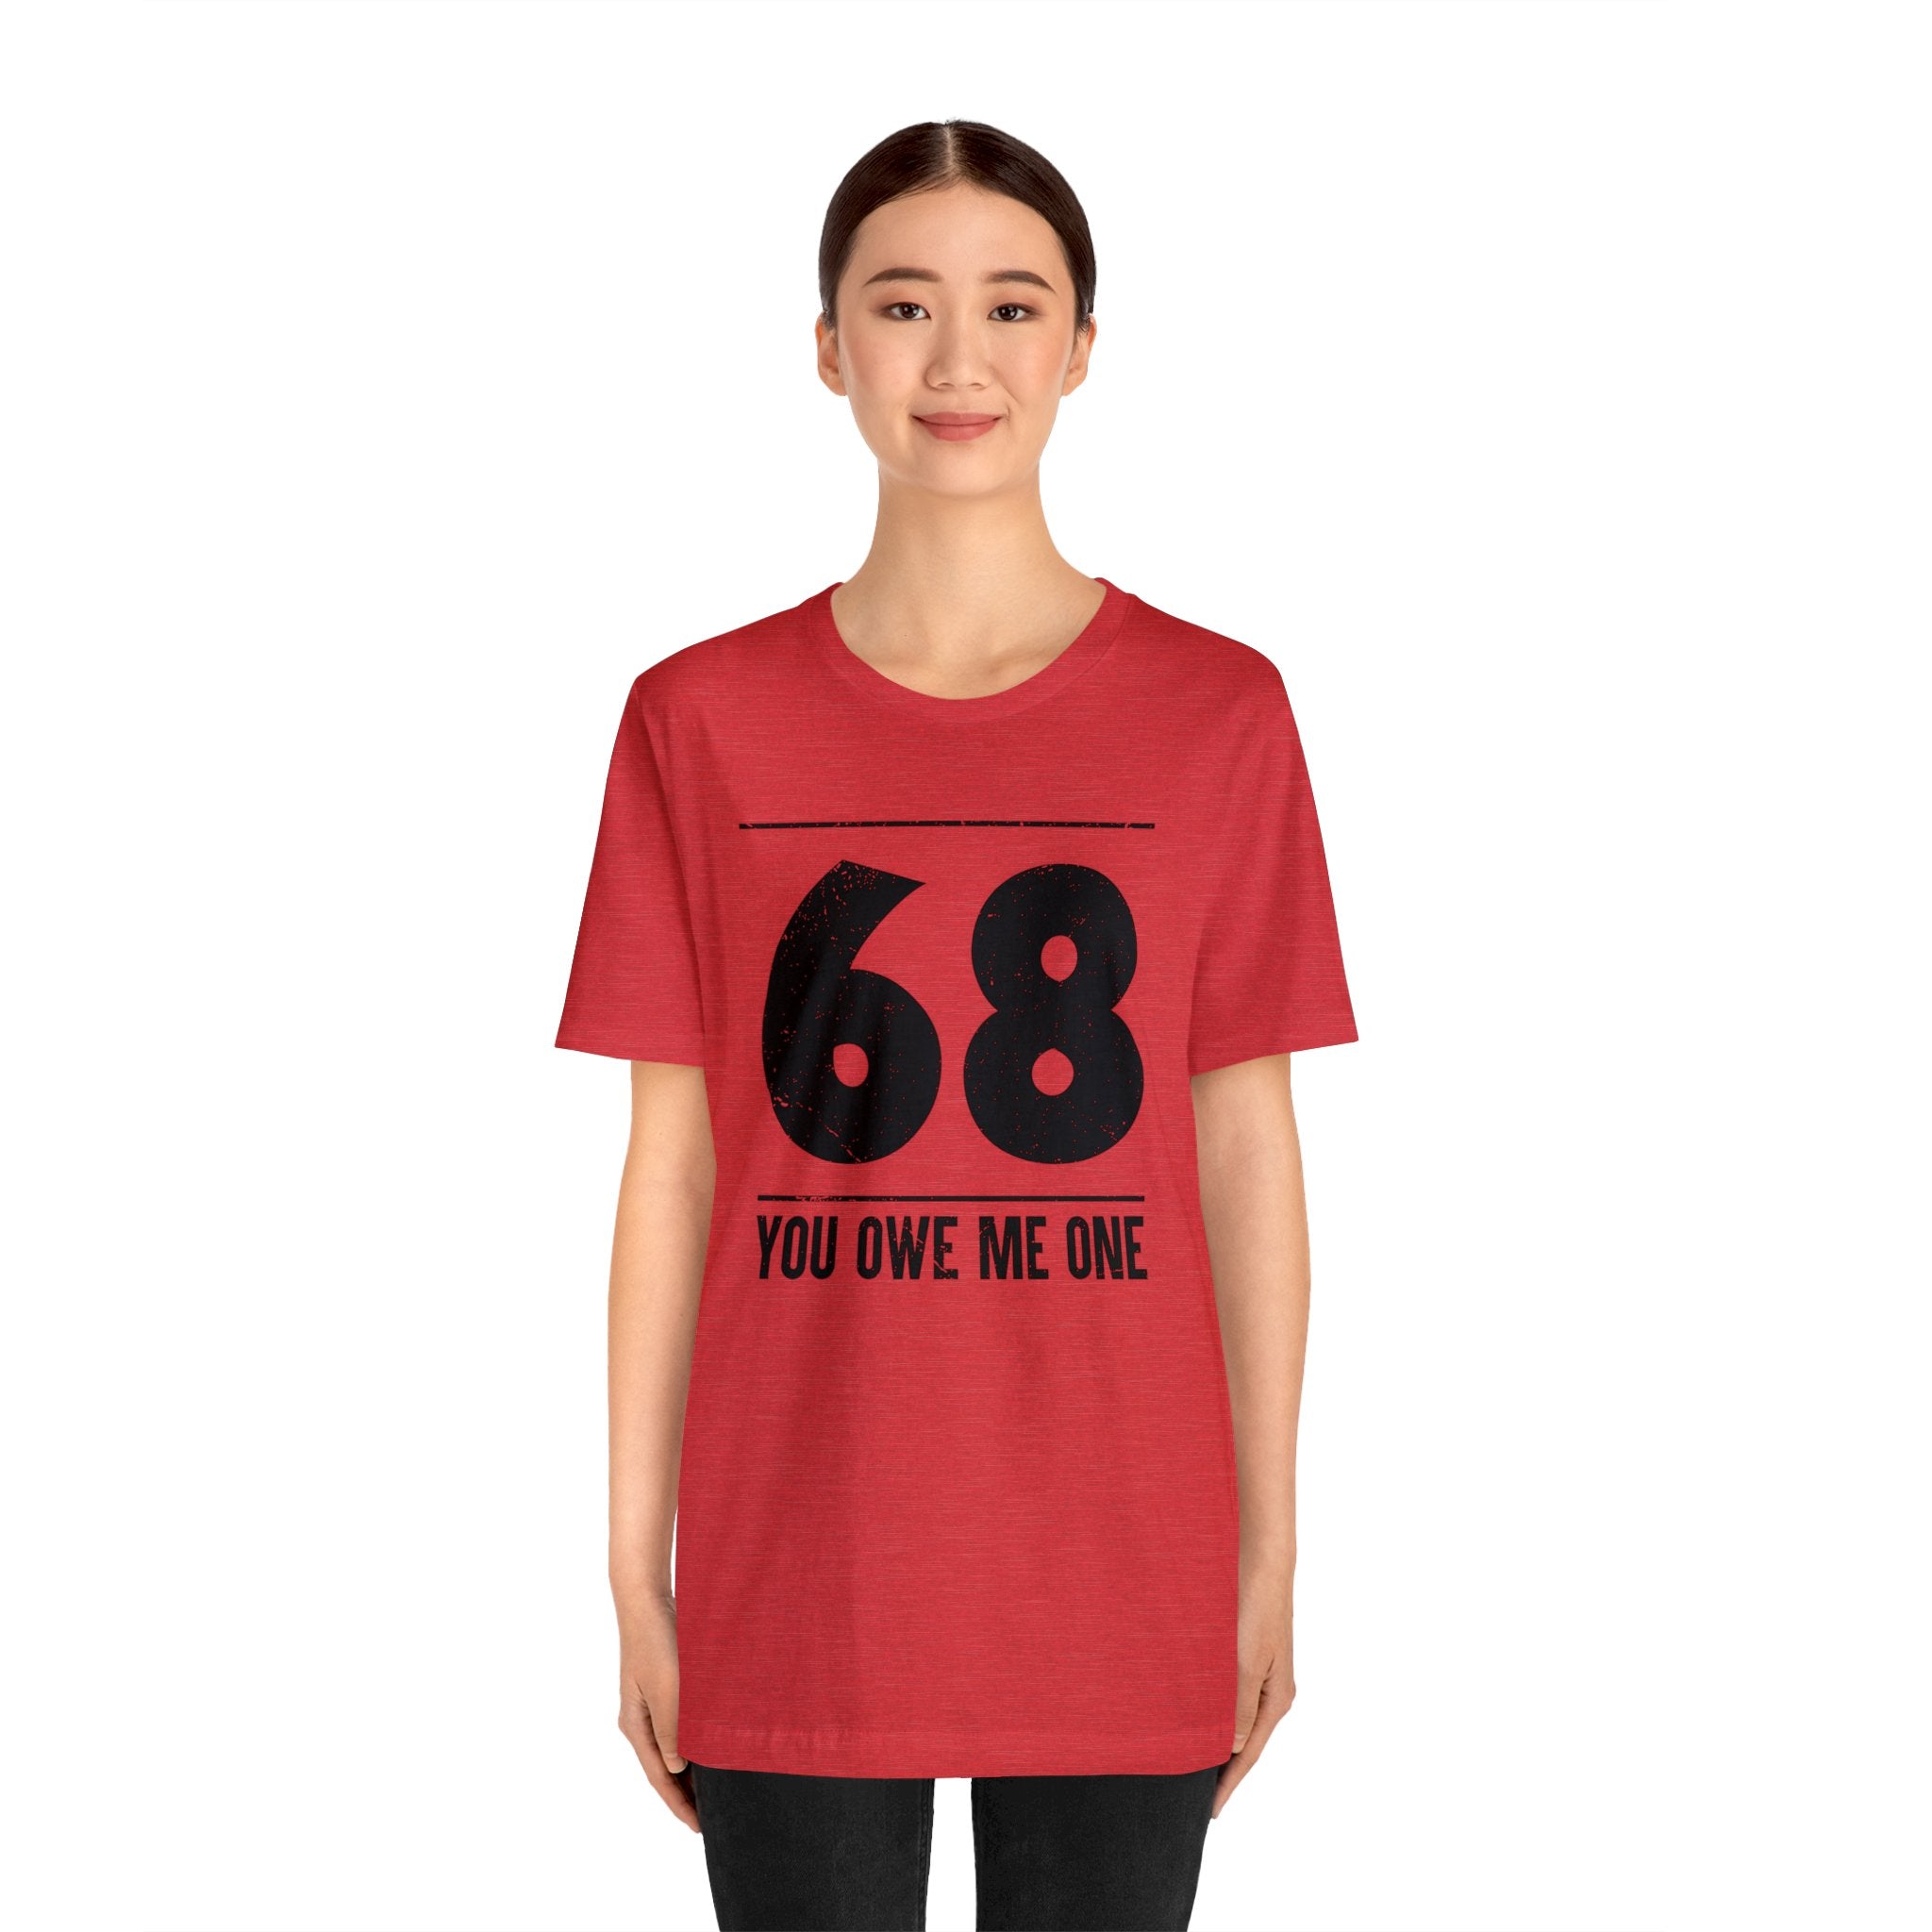 A woman in a geeky red t-shirt that says "68 You Owe Me One".